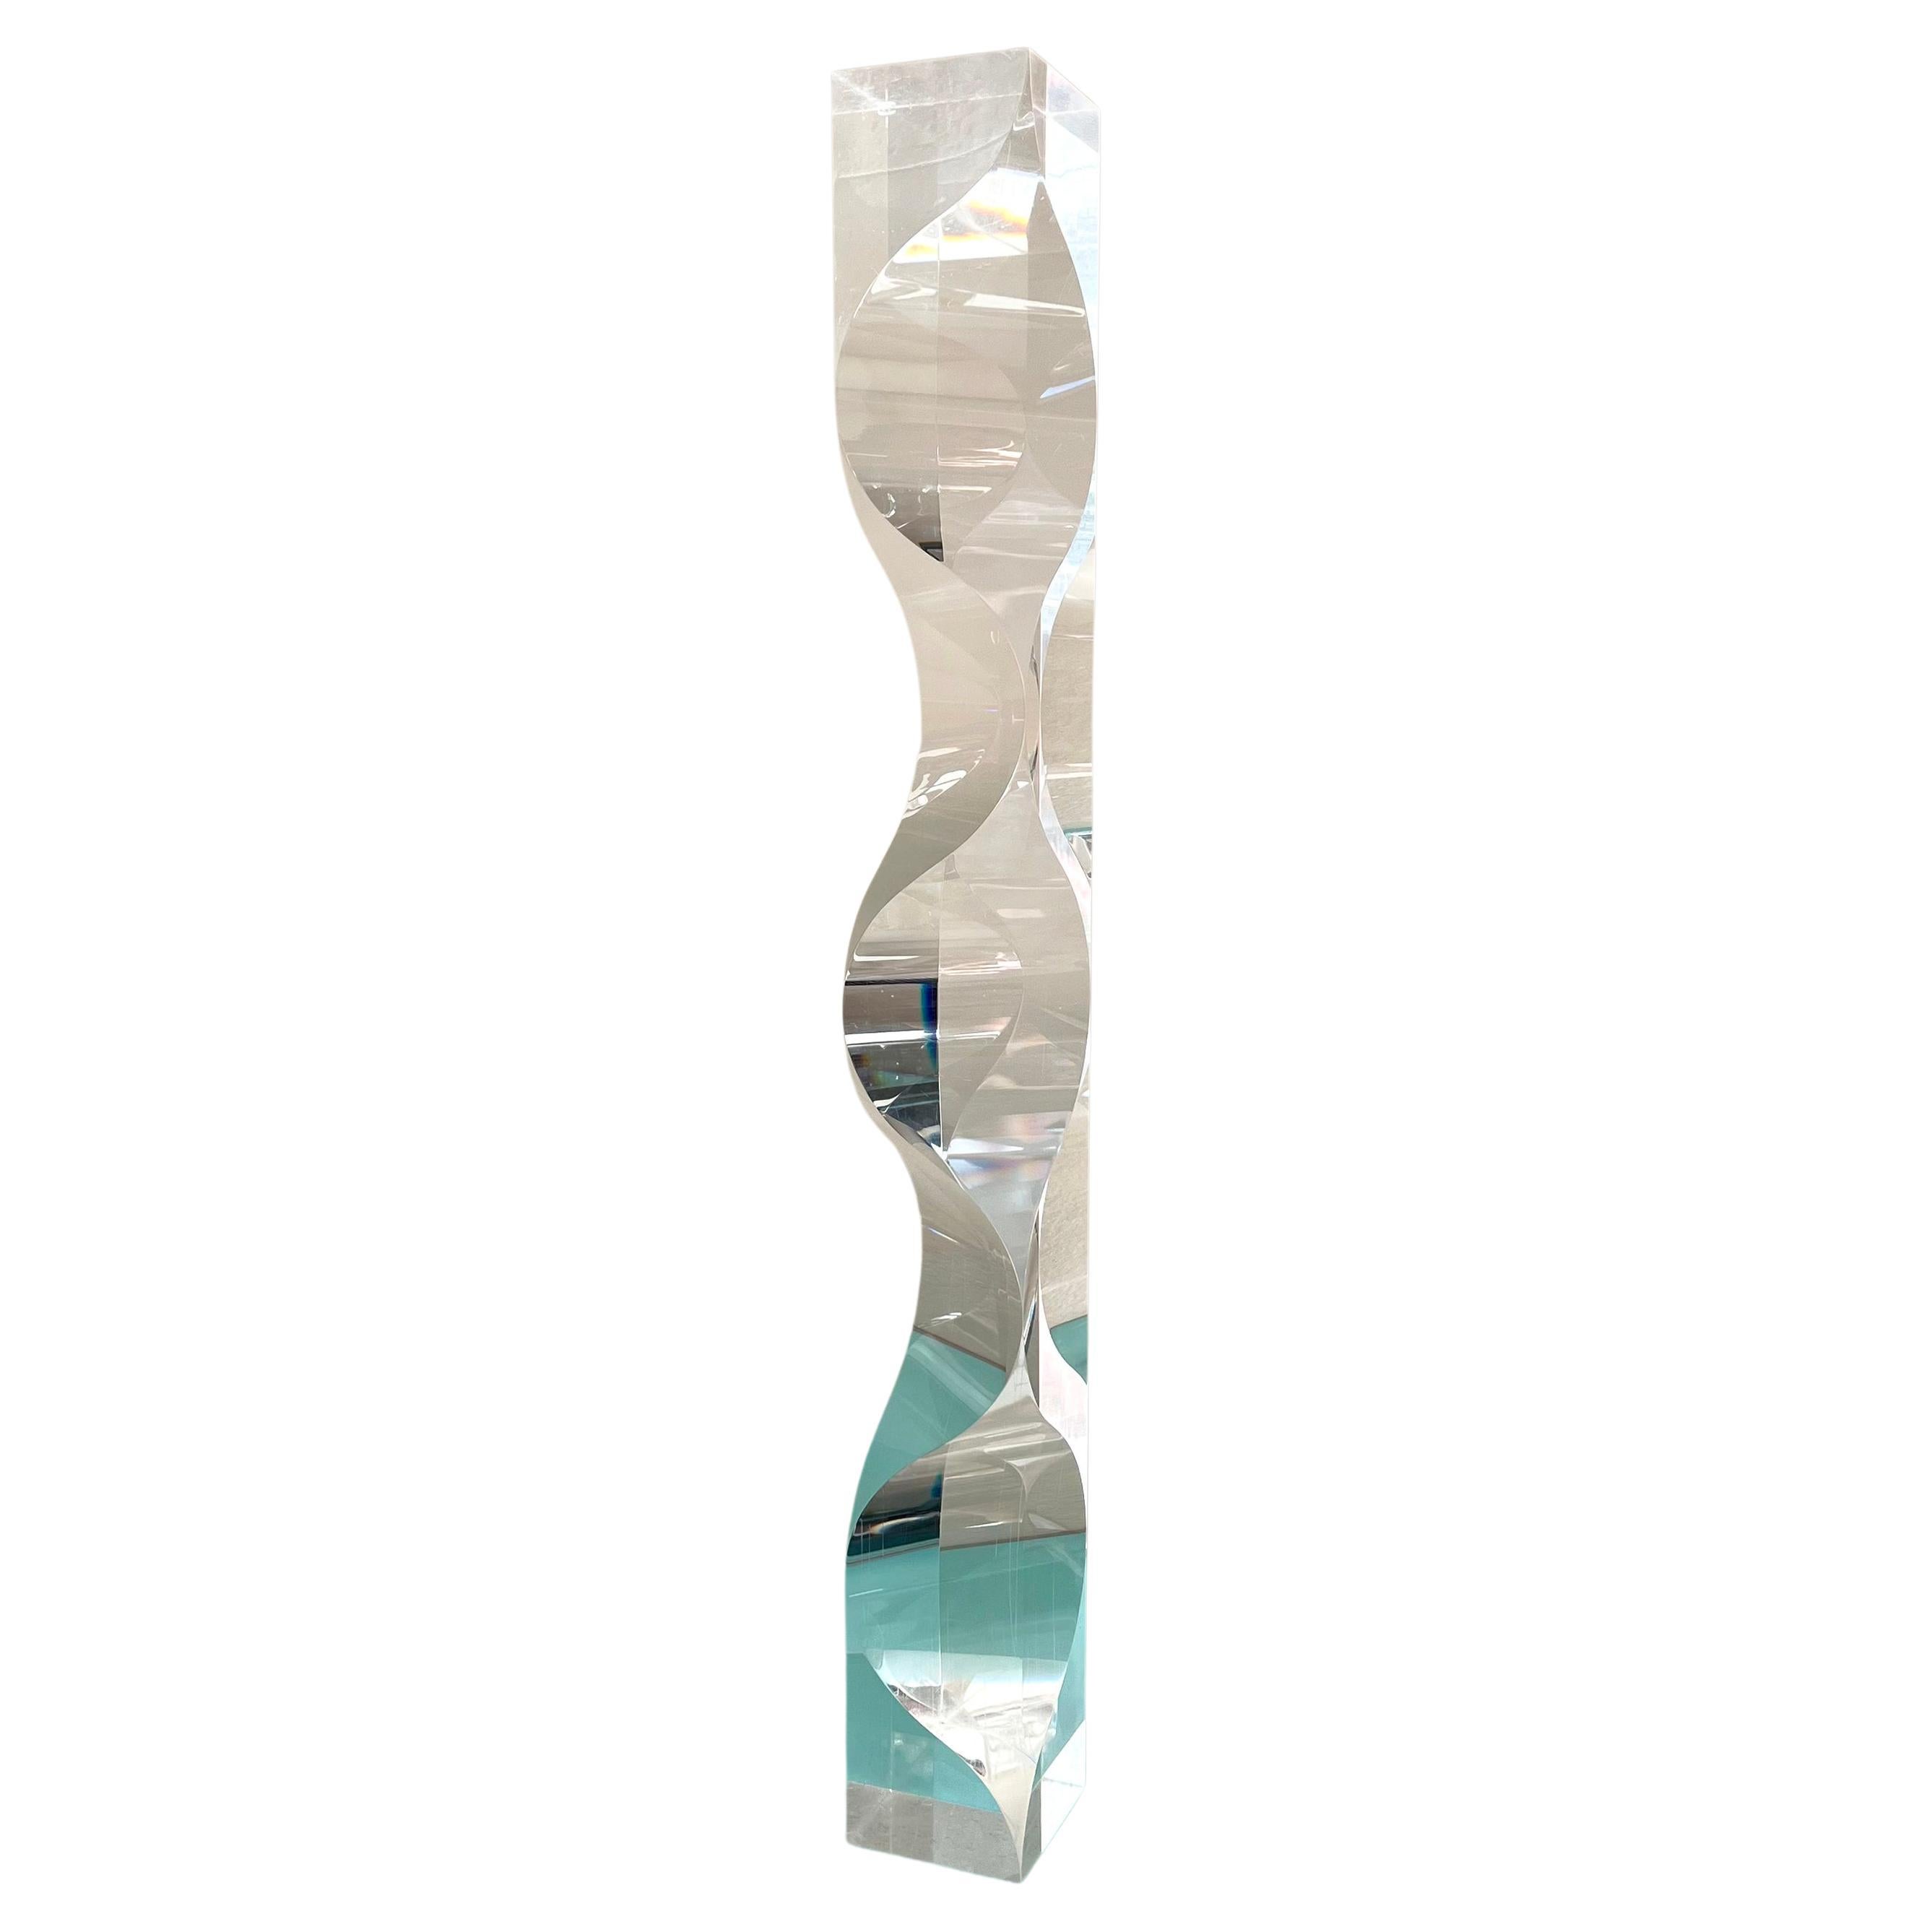 Late 20th Century Alessio Tasca for Fusina Acrylic Lucite Prism Tower Sculpture For Sale